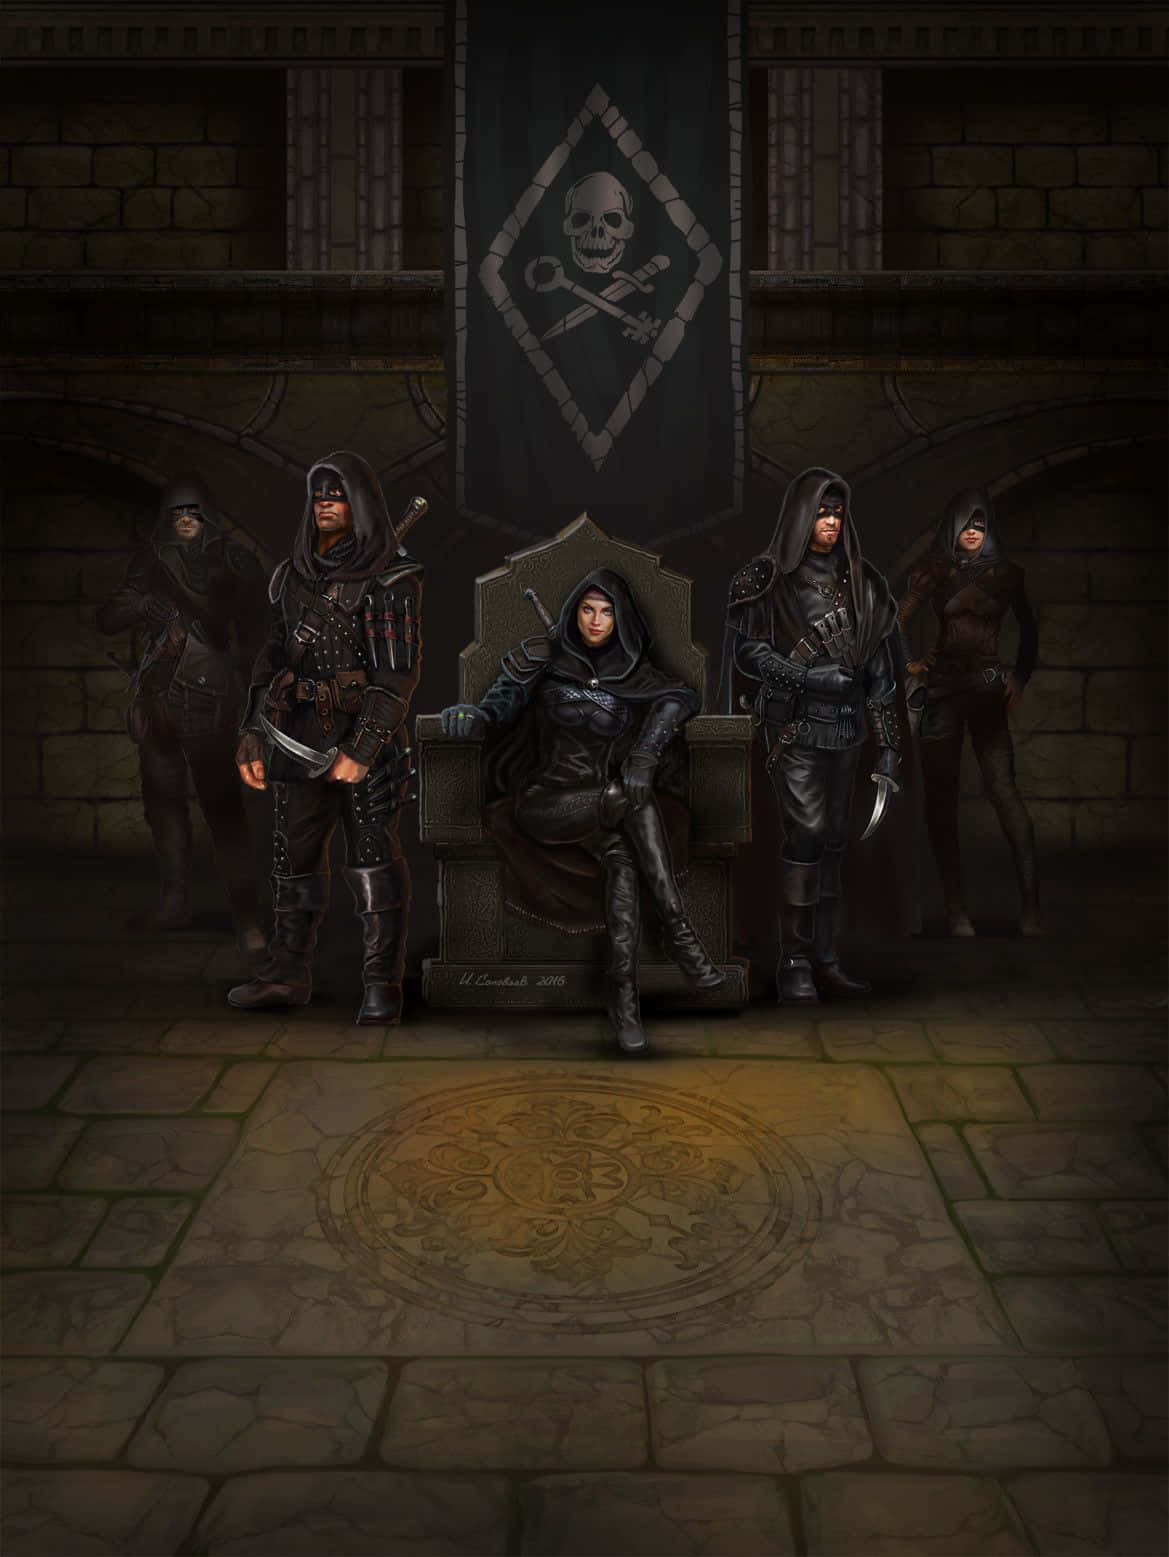 Intriguing Thieves Guild Meeting in Shadowy Hideout Wallpaper